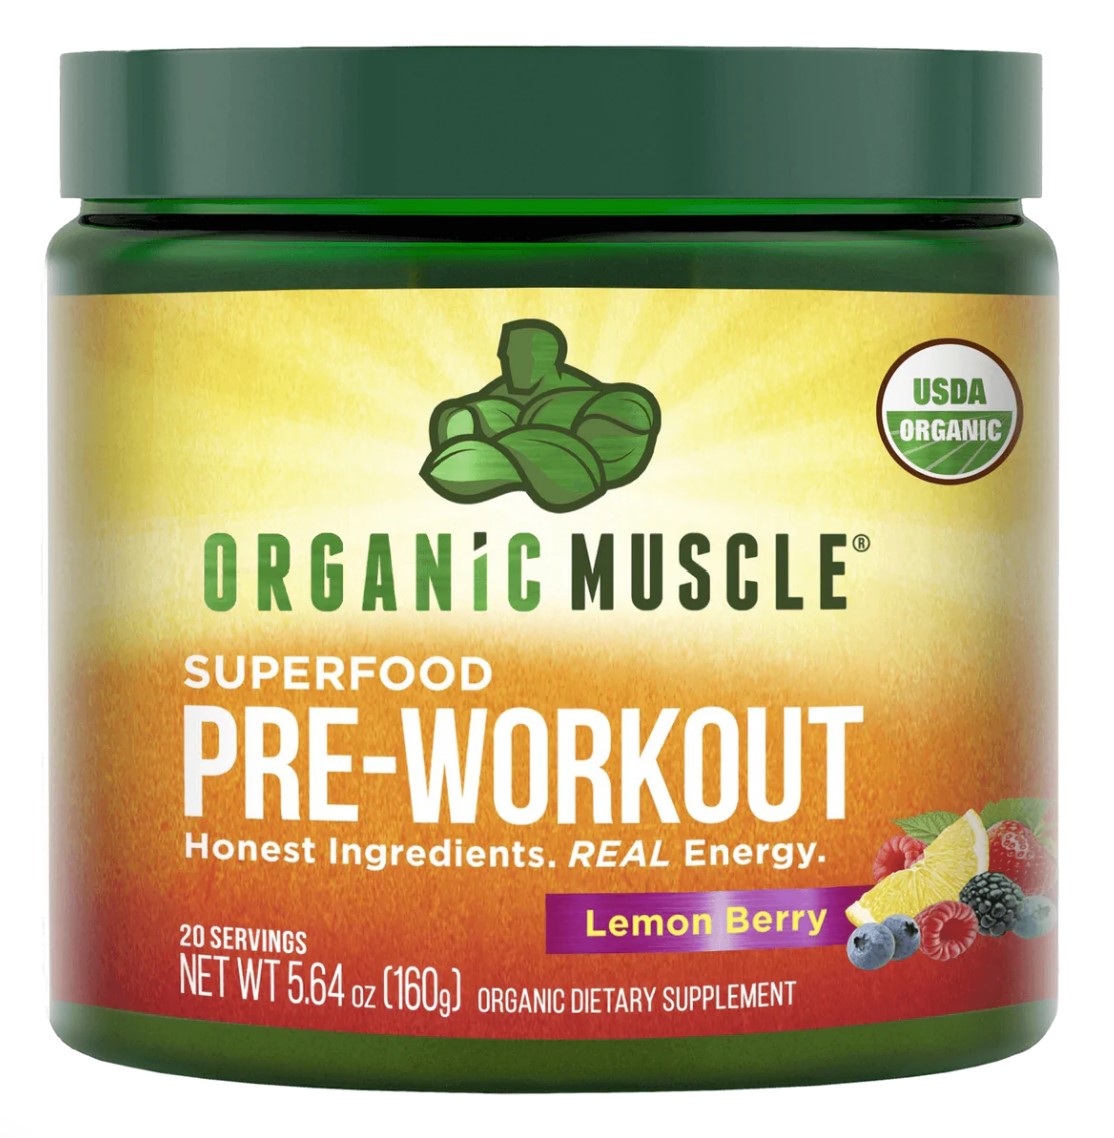 A container of superfood pre-workout by Organic Muscle 